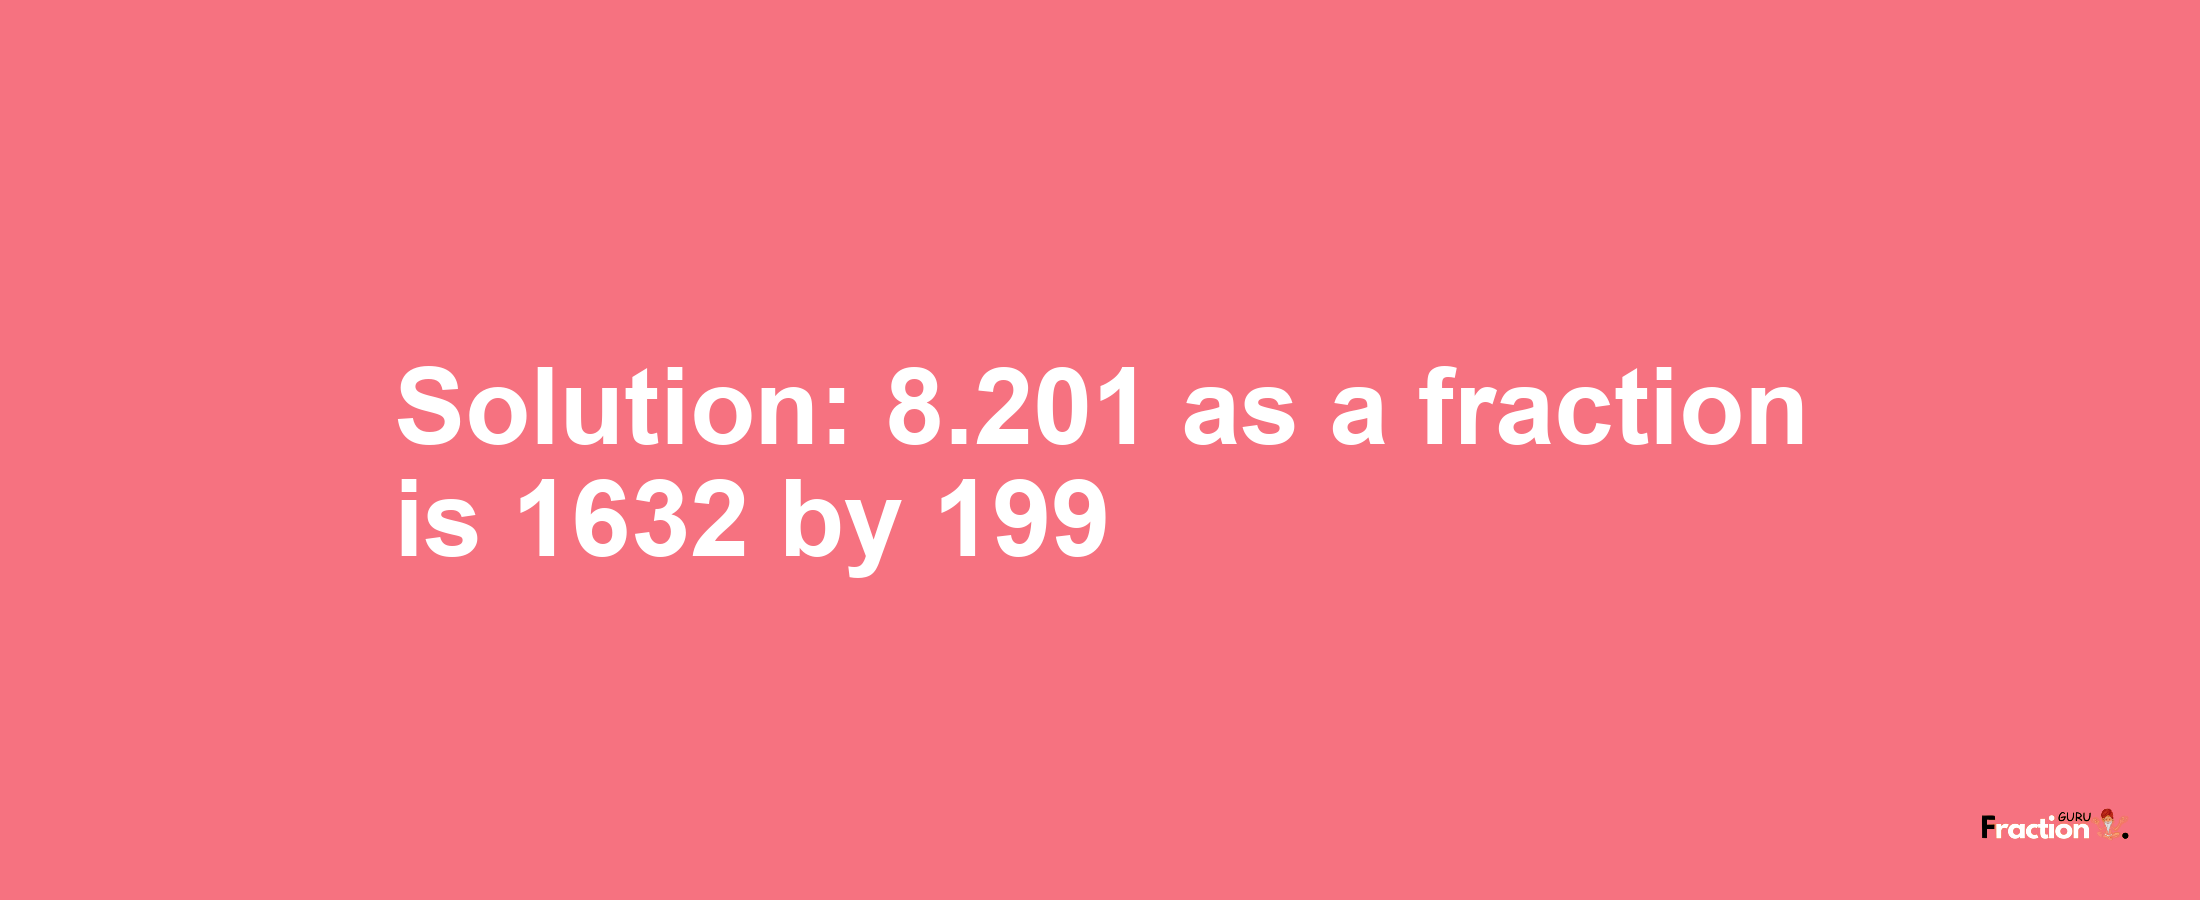 Solution:8.201 as a fraction is 1632/199